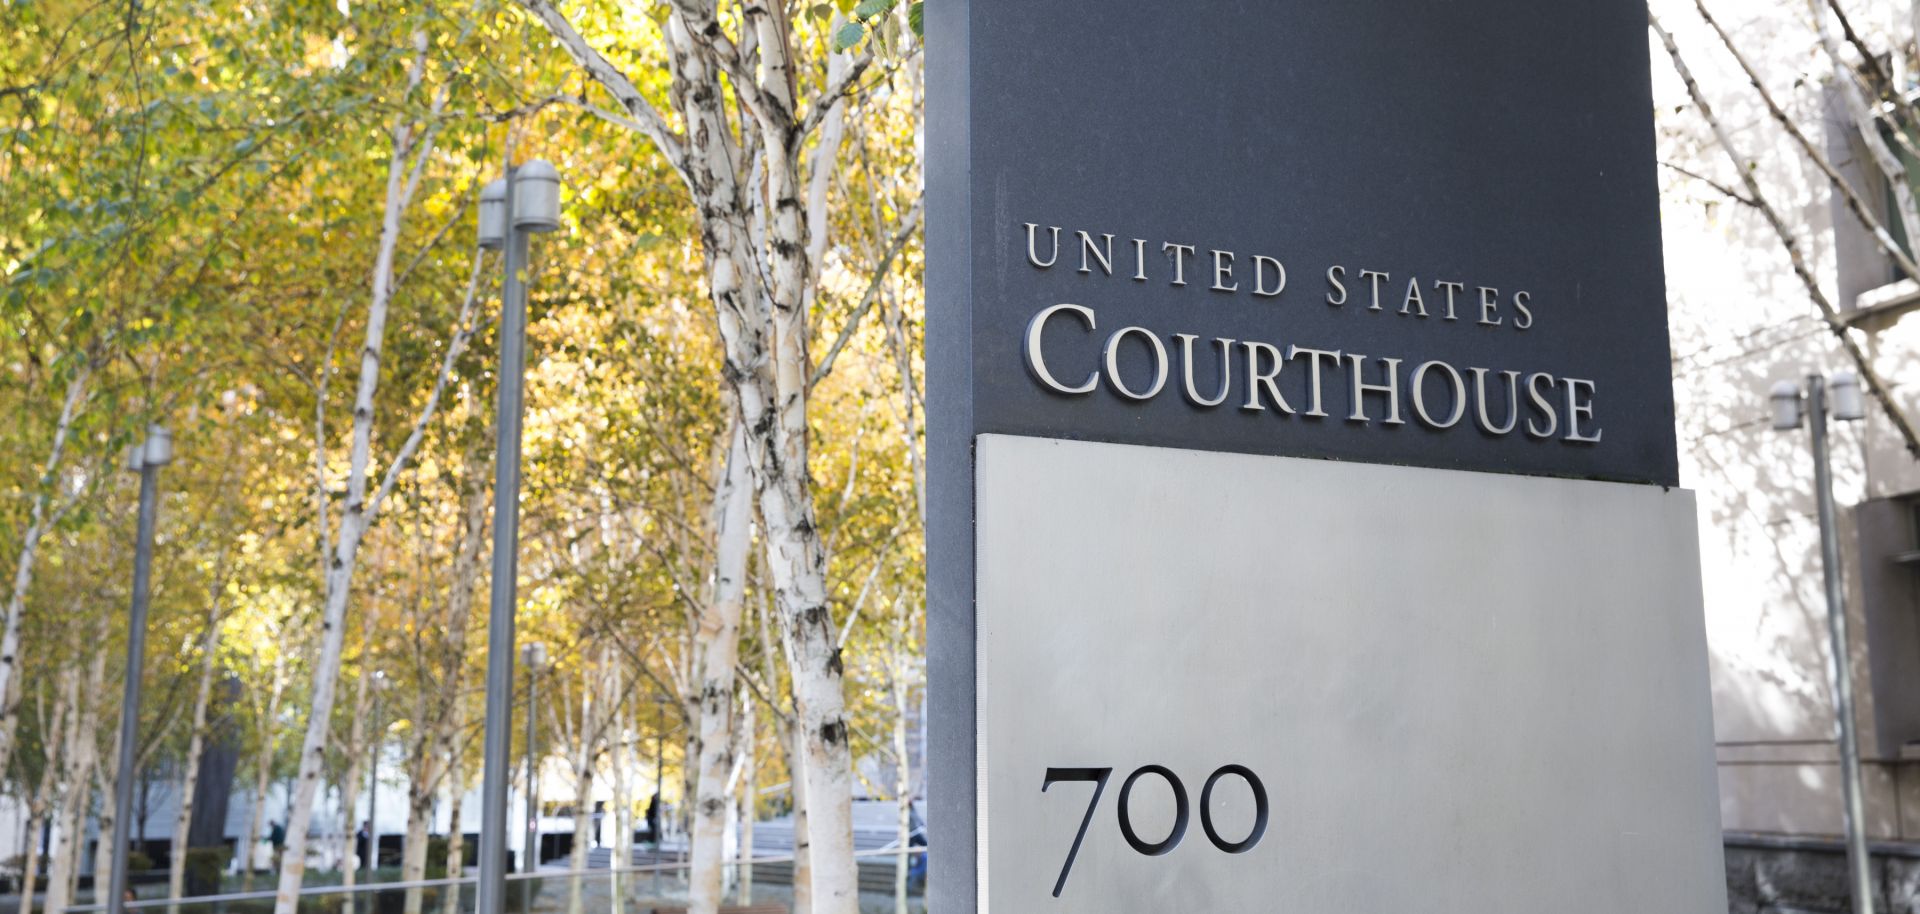 The U.S. District Court of the Western District of Washington is pictured in Seattle on Nov. 8, 2019.